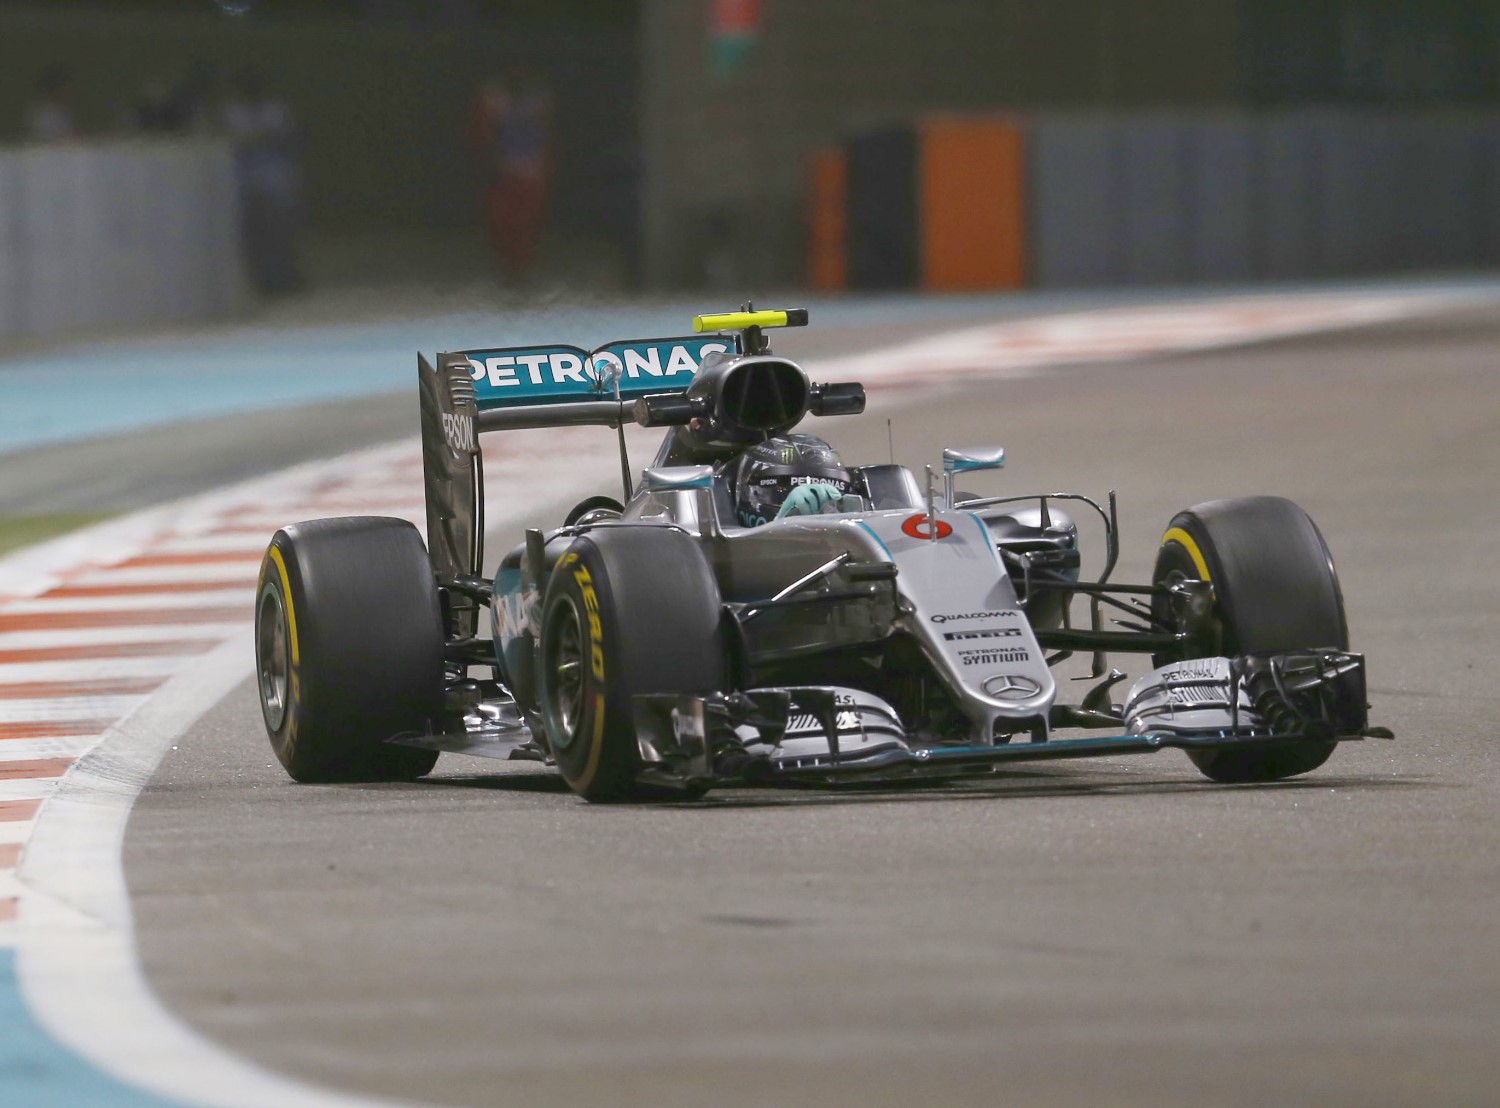 Rosberg could not touch Hamilton's time. No one could touch the Mercedes cars.